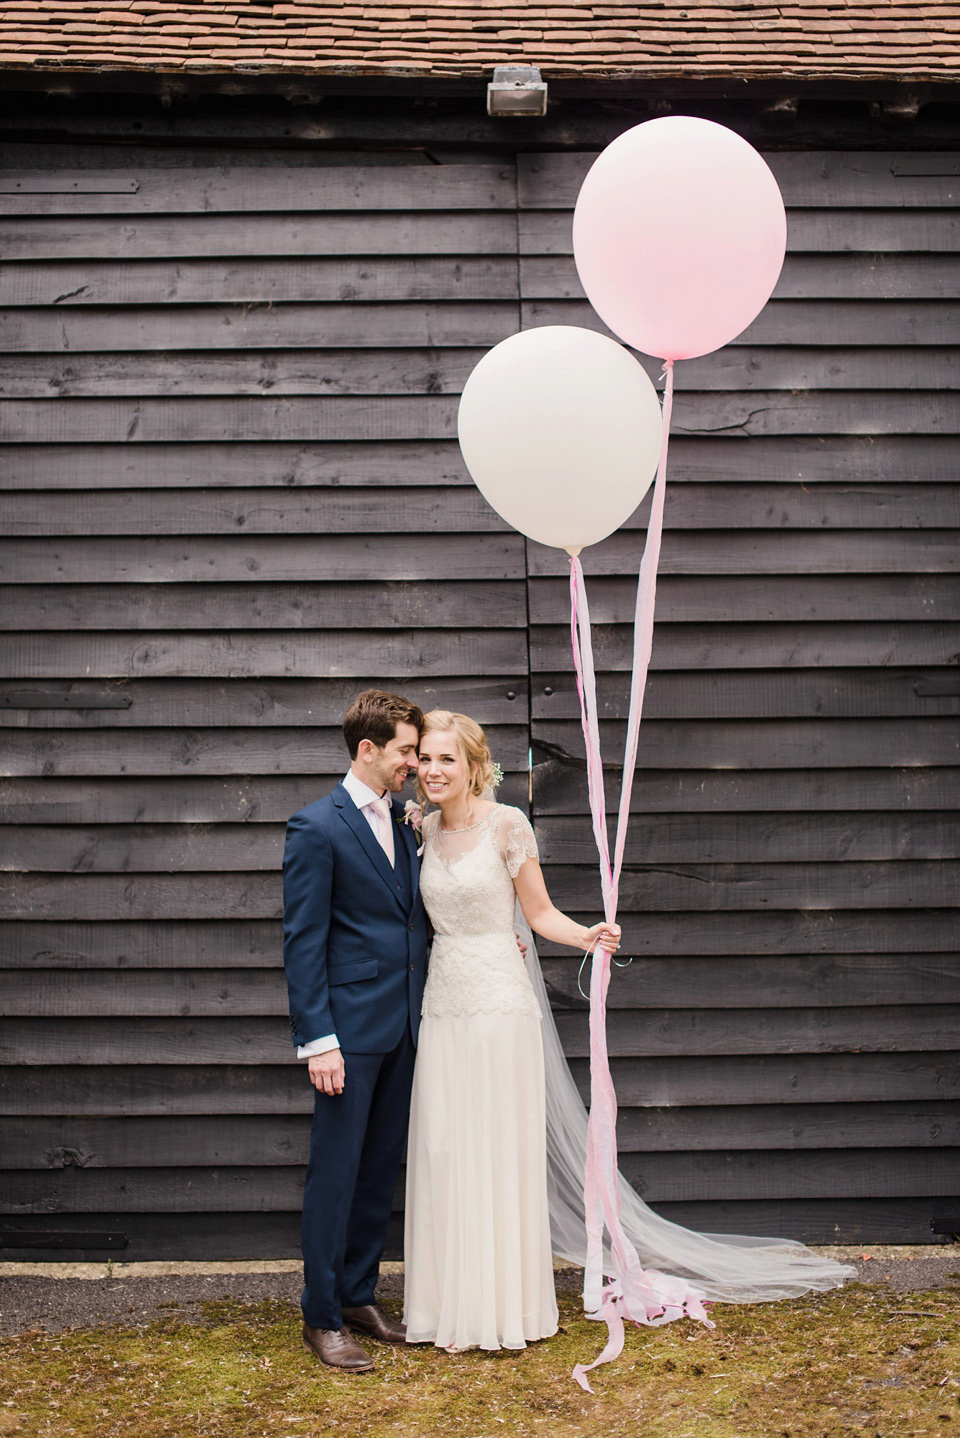 Jenny Packham Elegance for a Pastel Colour and Rustic Village Barn Wedding